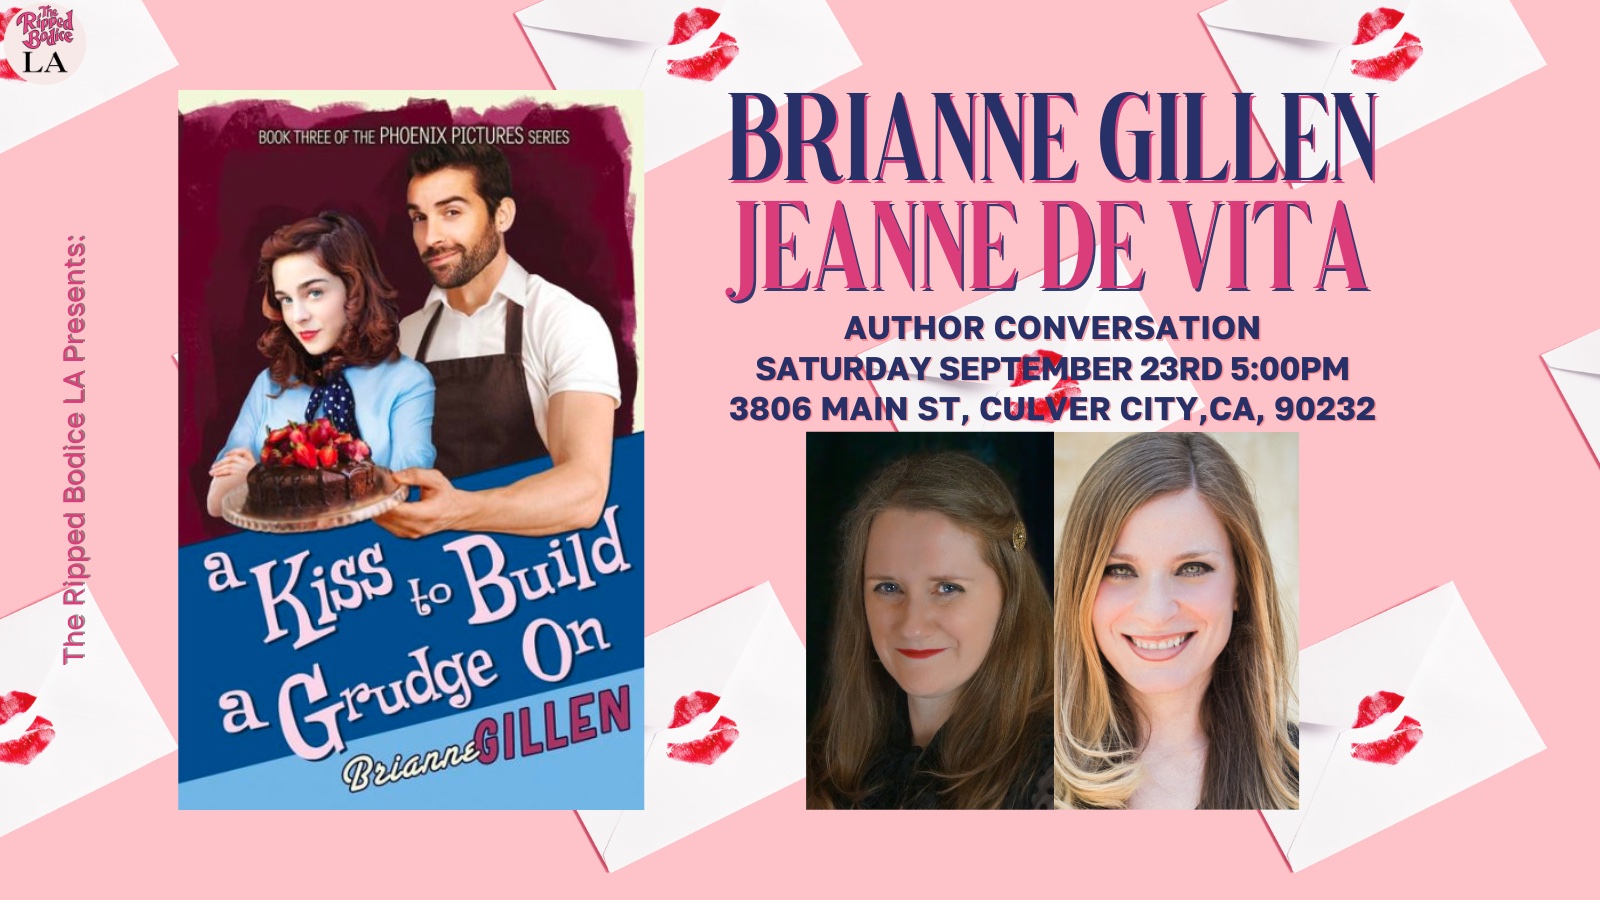 Against a pink background with kiss-sealed envelopes, the cover of A Kiss To Build a Grudge On, and photos of Brianne Gillen and Jeanne De Vita, along with details about the event at the Ripped Bodice (which are also found in the post on this web page.)